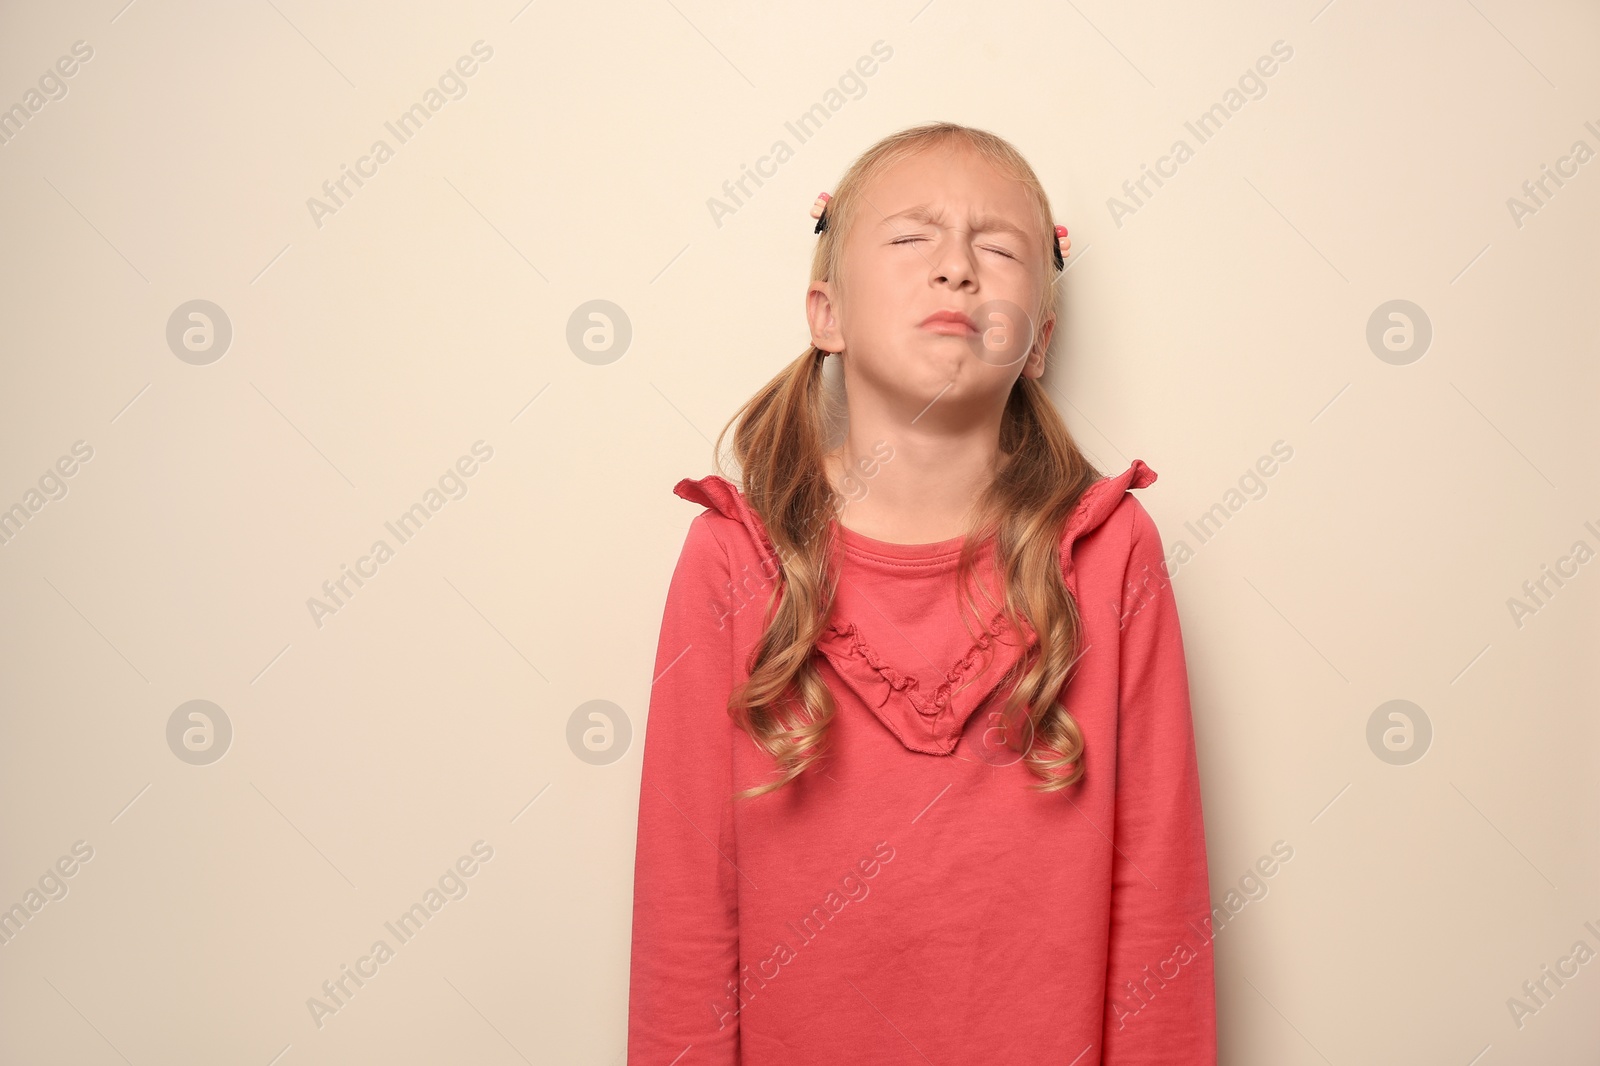 Photo of Cute little girl crying on light background. Space for text